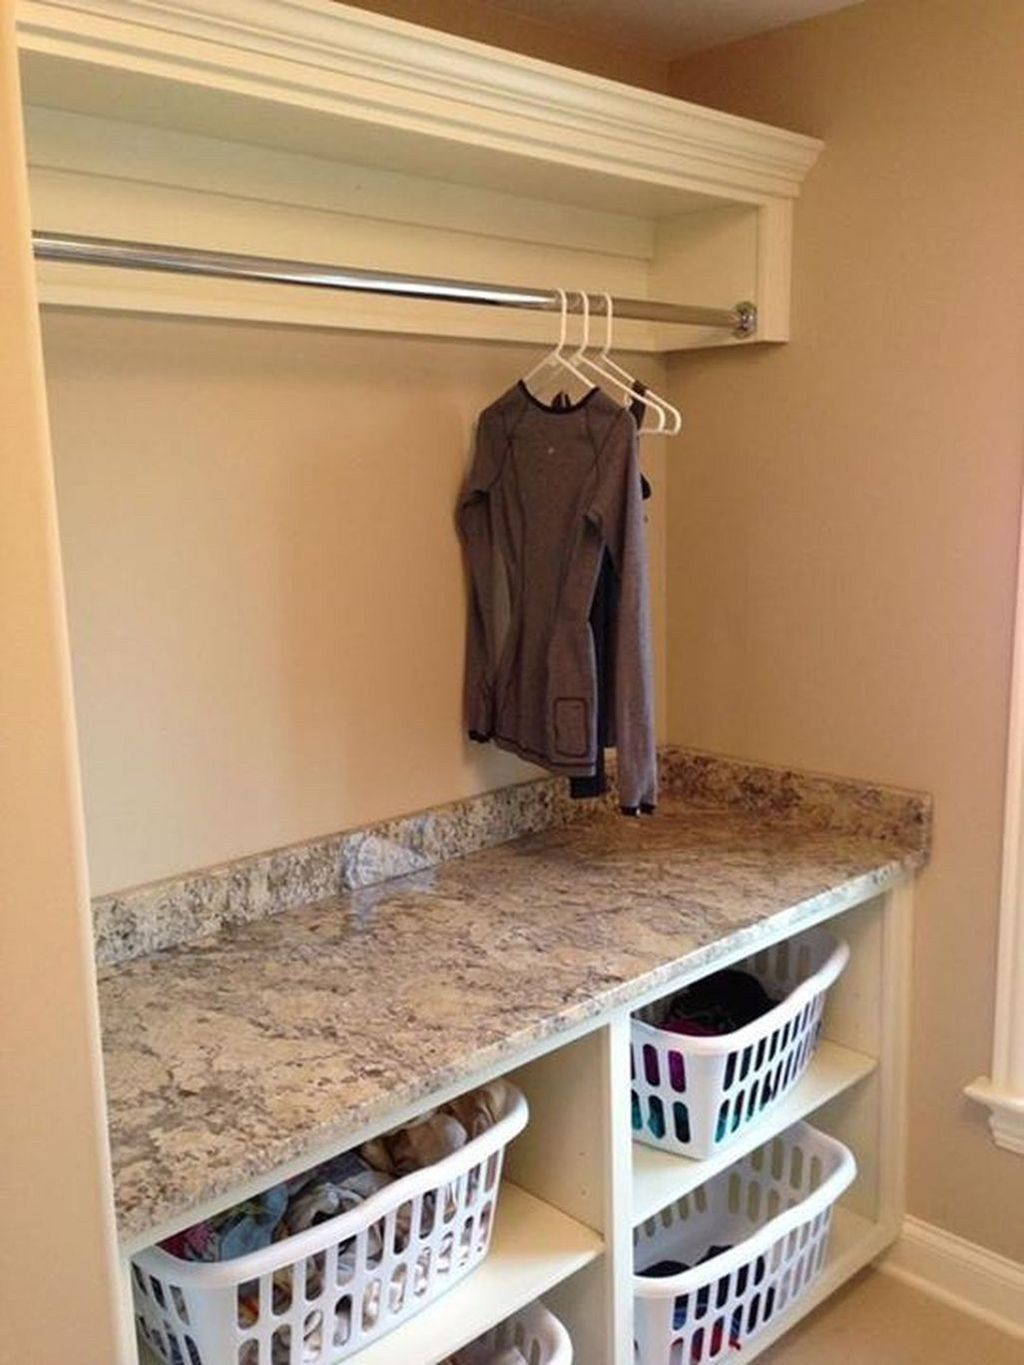 Favored Laundry Room Organization Ideas To Try 26